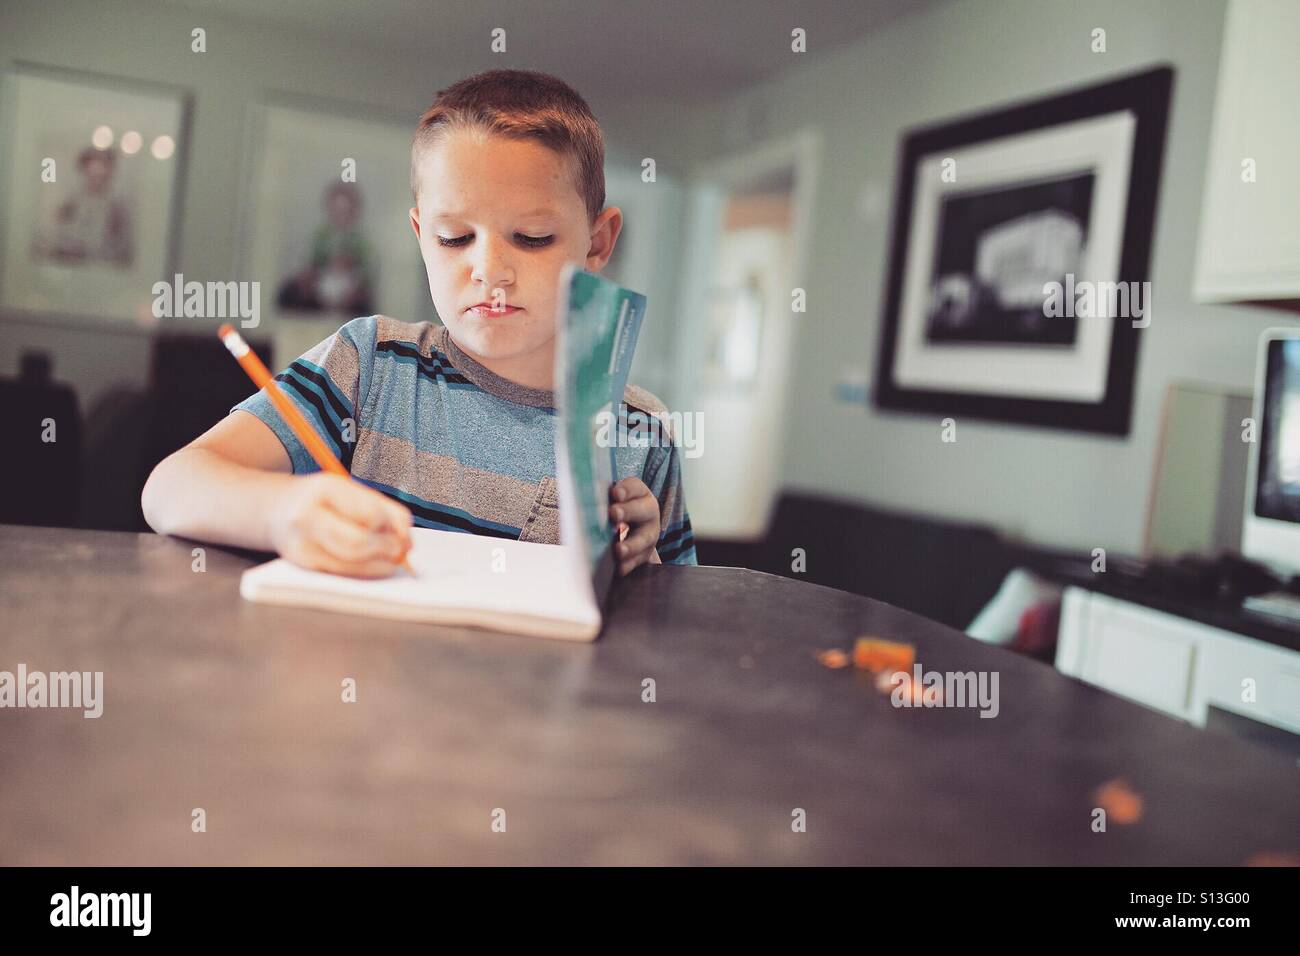 Boy writing in a notebook in the kitchen Stock Photo